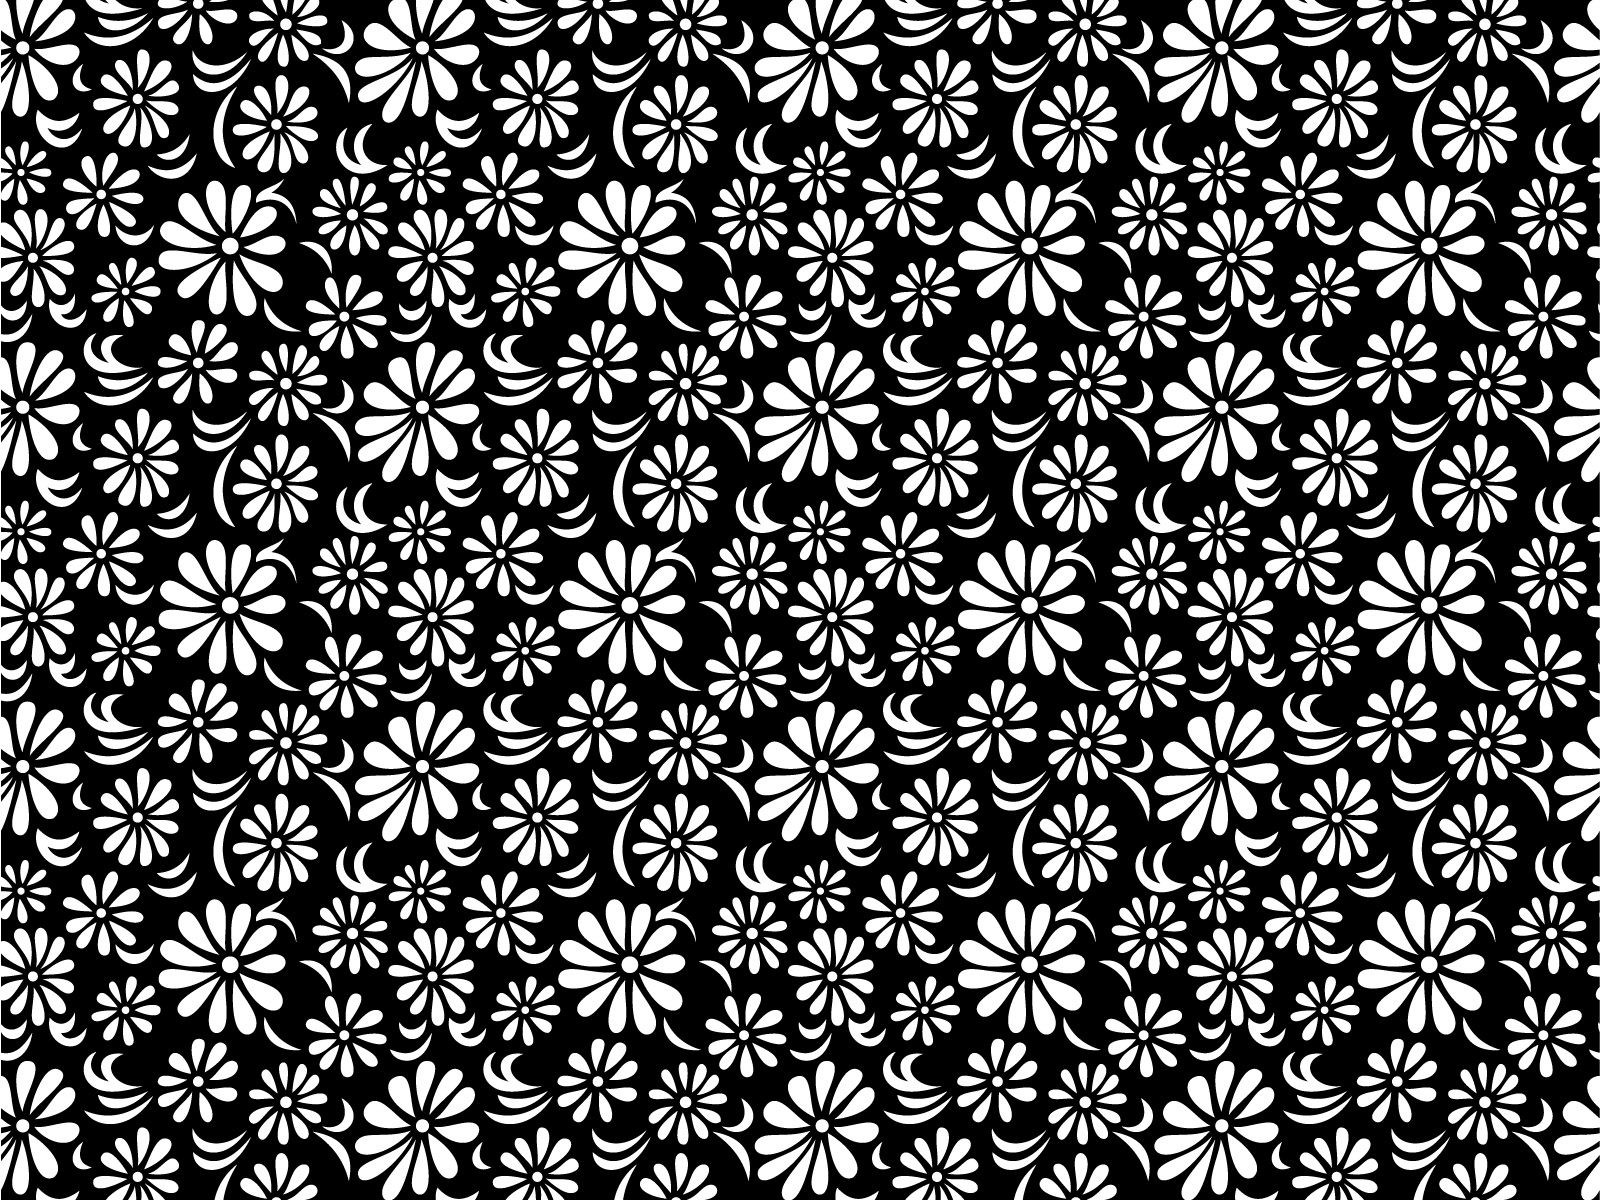 FREE Black & White Floral Wallpaper in PSD